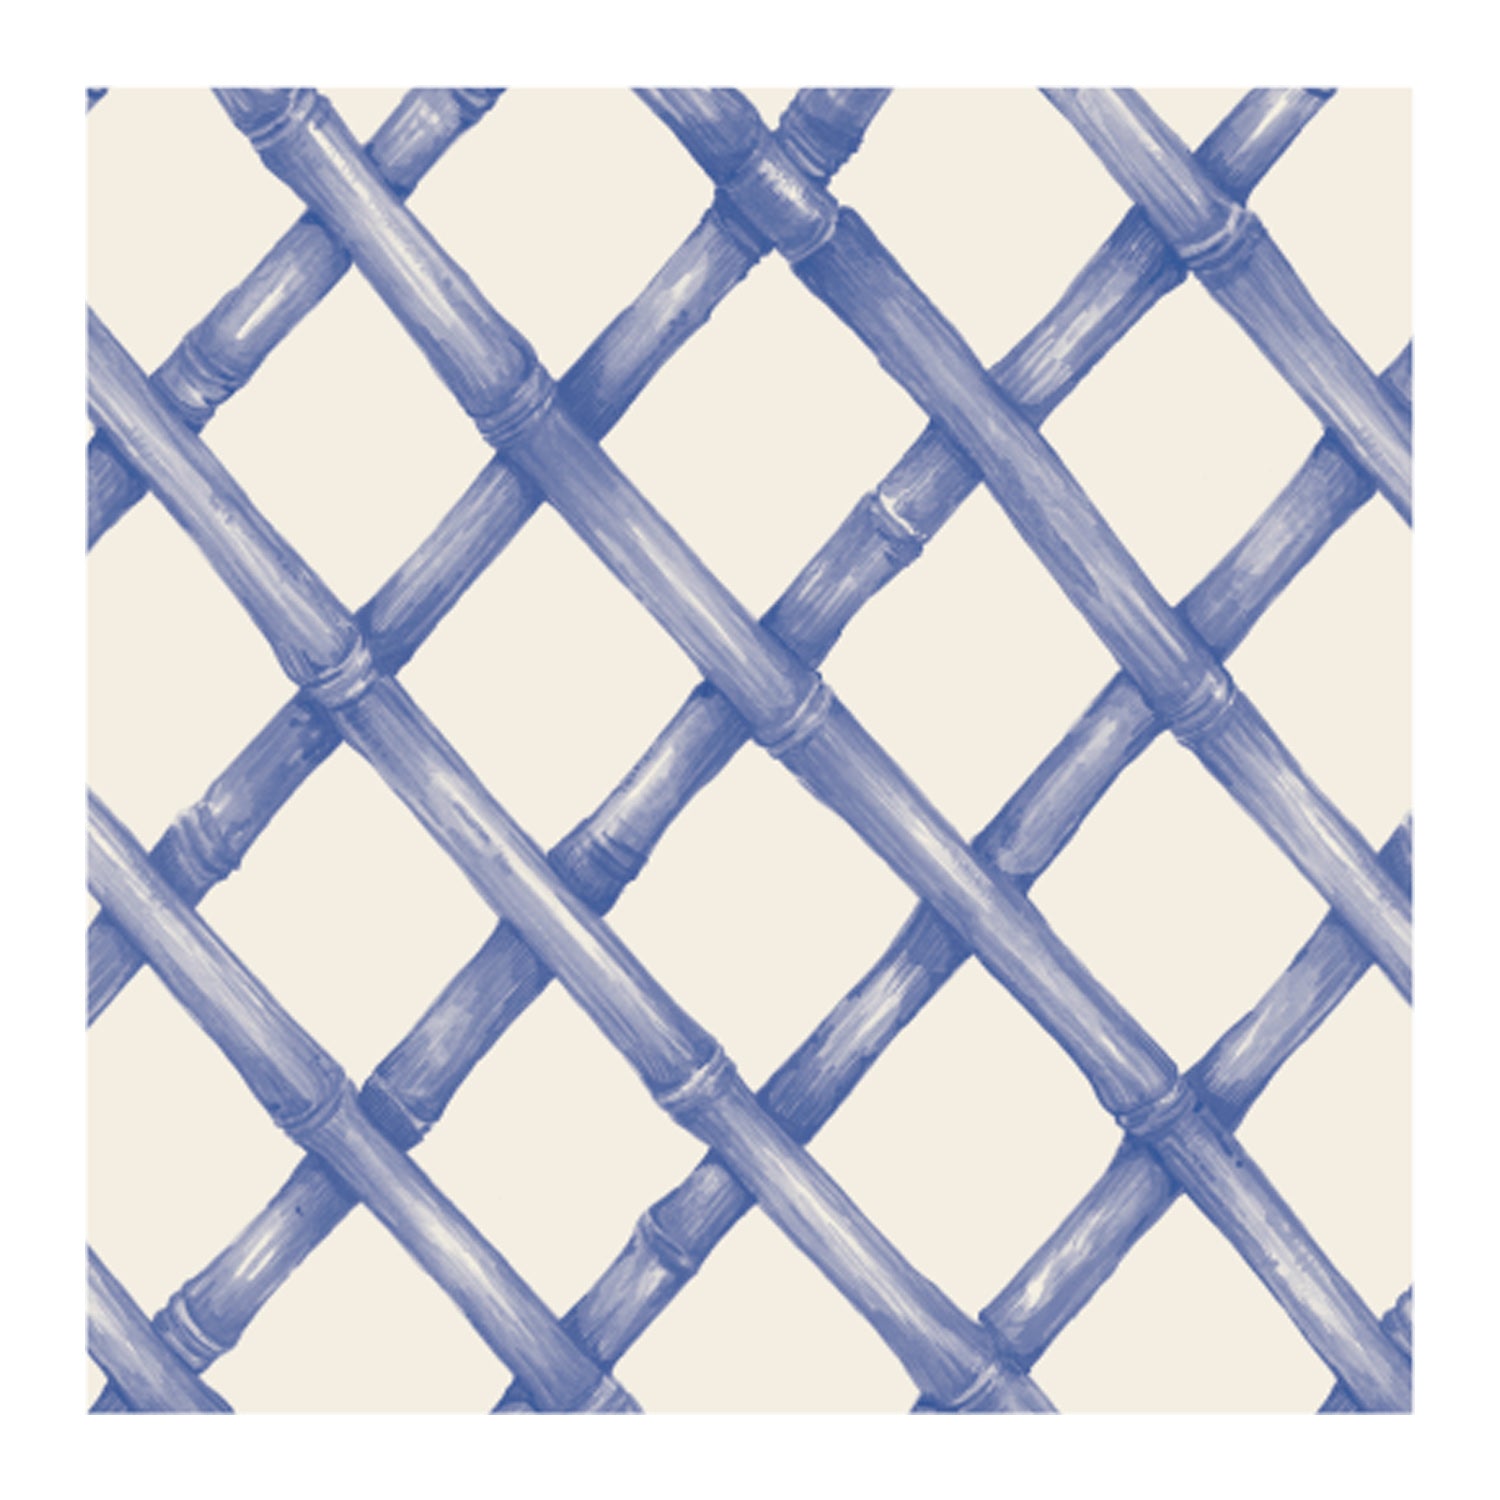 A Hester &amp; Cook Blue Lattice pattern on a cocktail napkin.